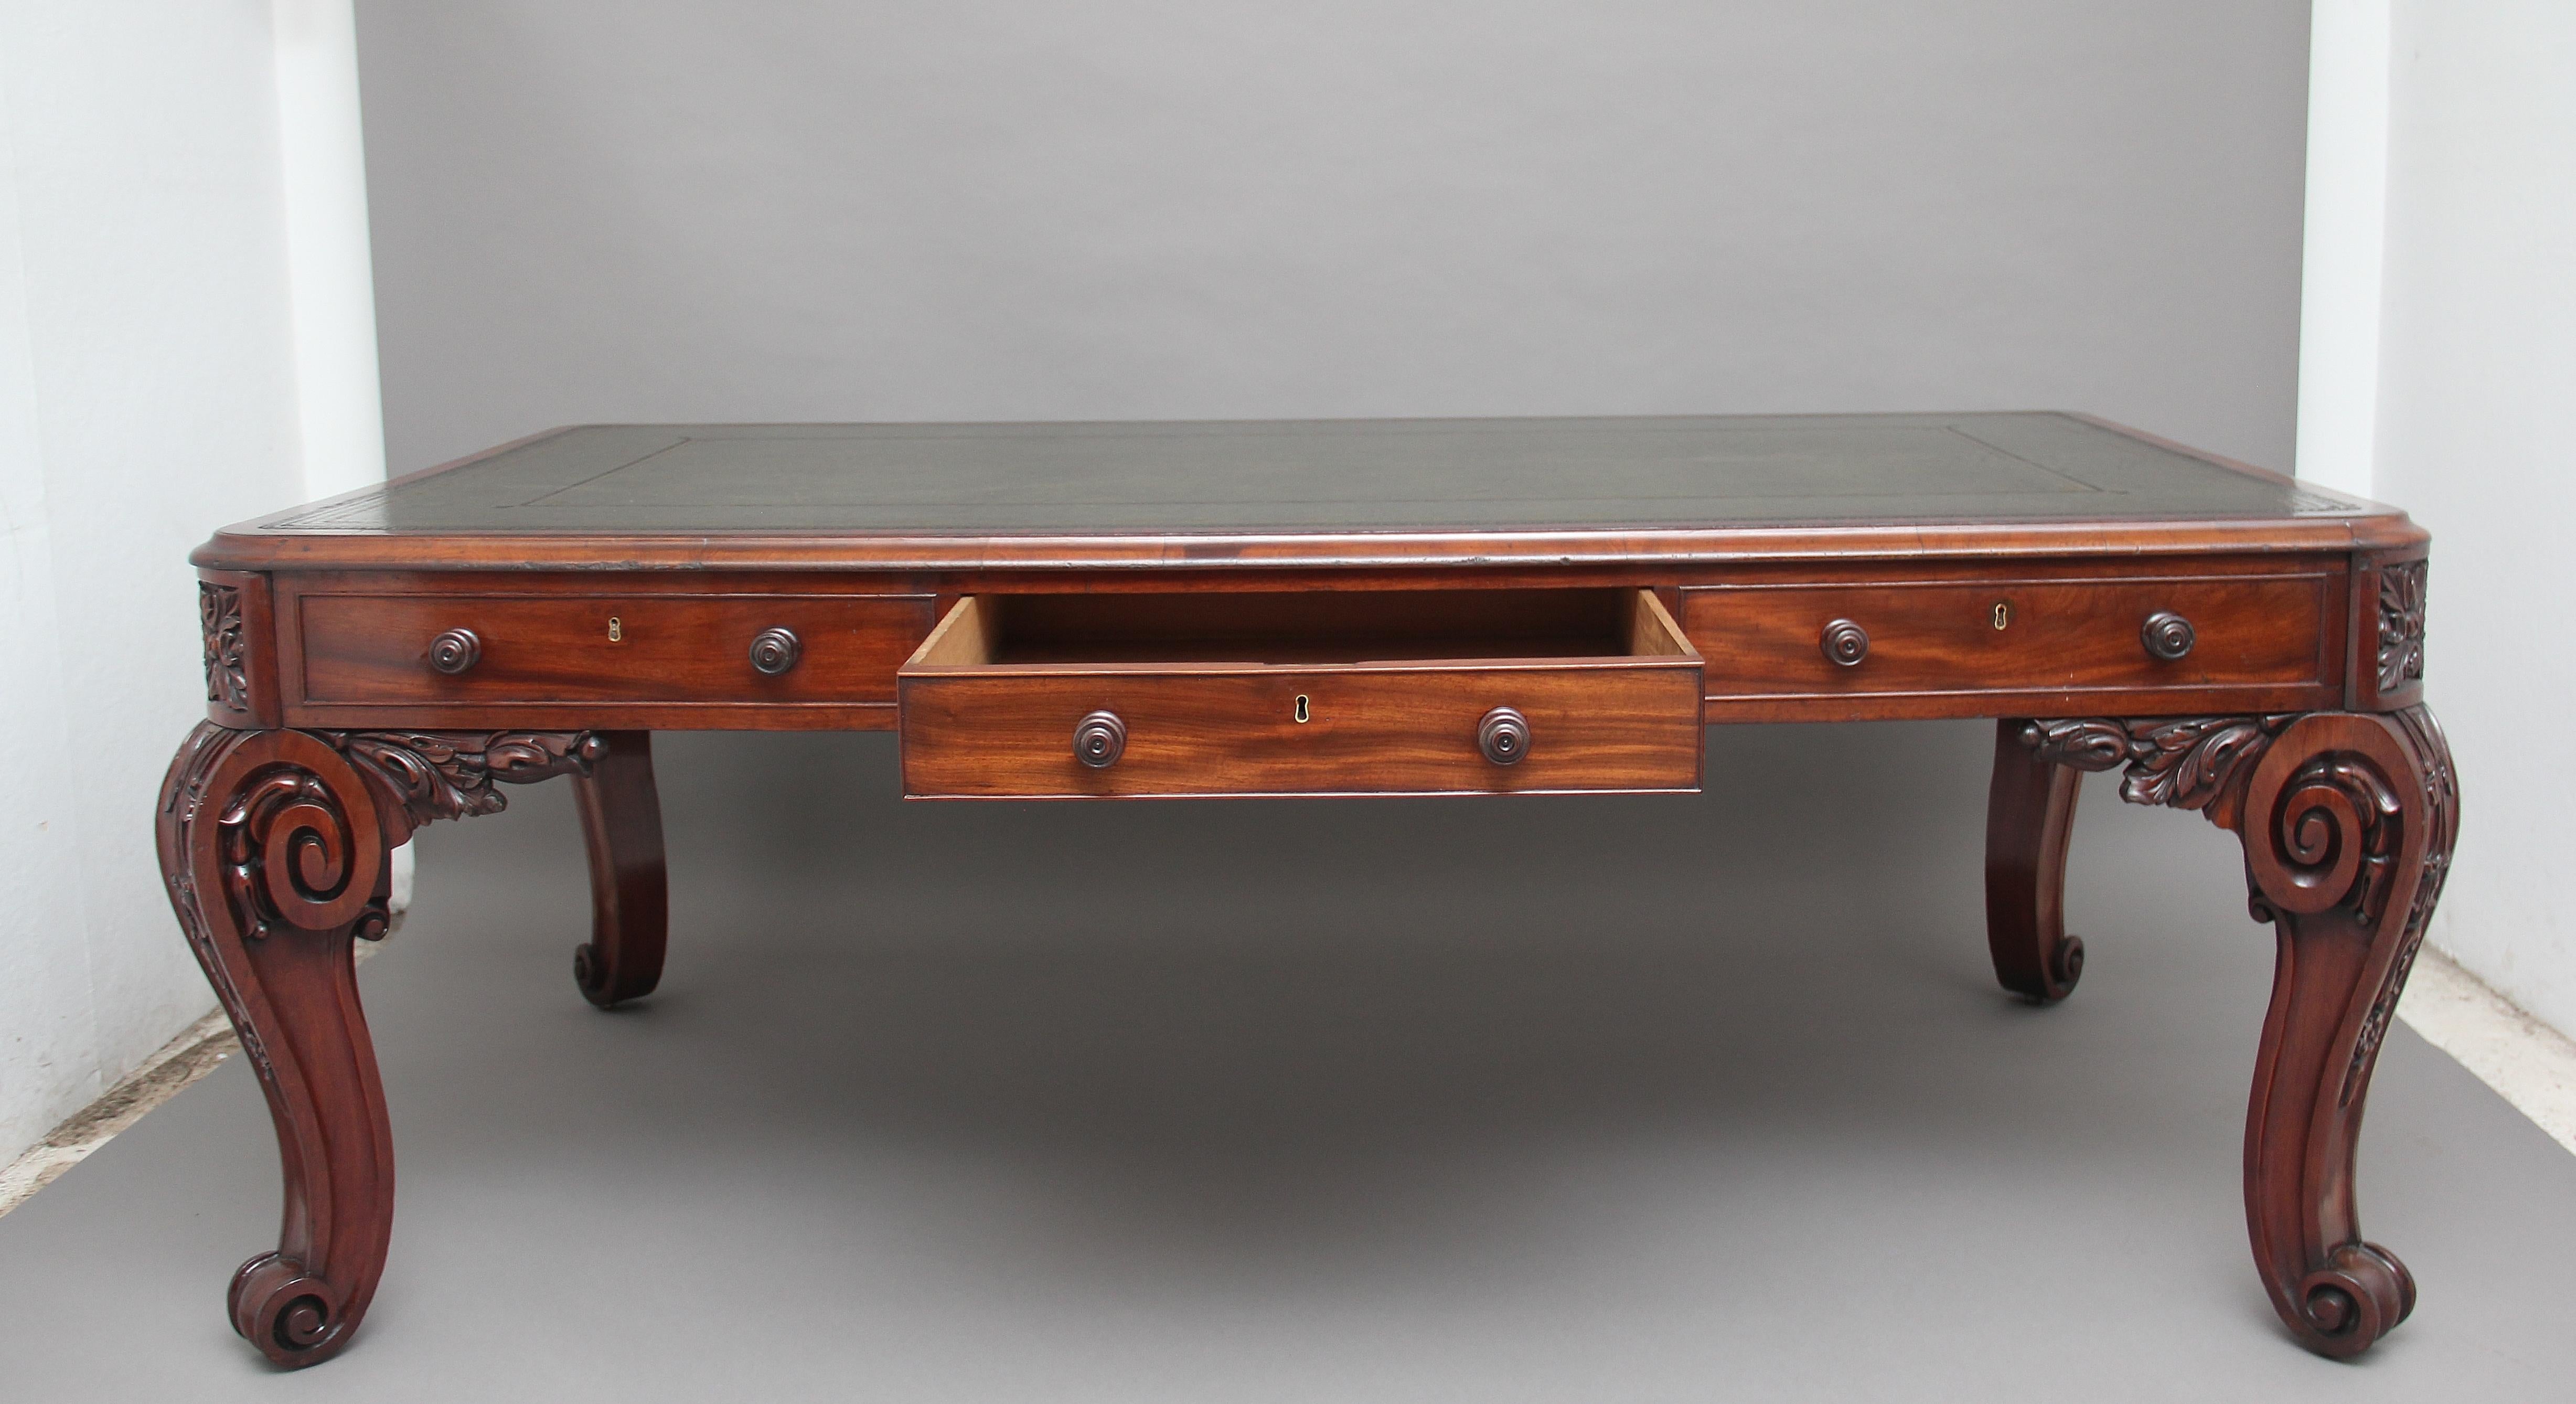 A stunning and important 19th century mahogany writing table / desk standing on four fabulous carved cabriole legs, on each side are two faux drawers and one working drawer in the middle, then on each end is a fitted drawer with a green leather